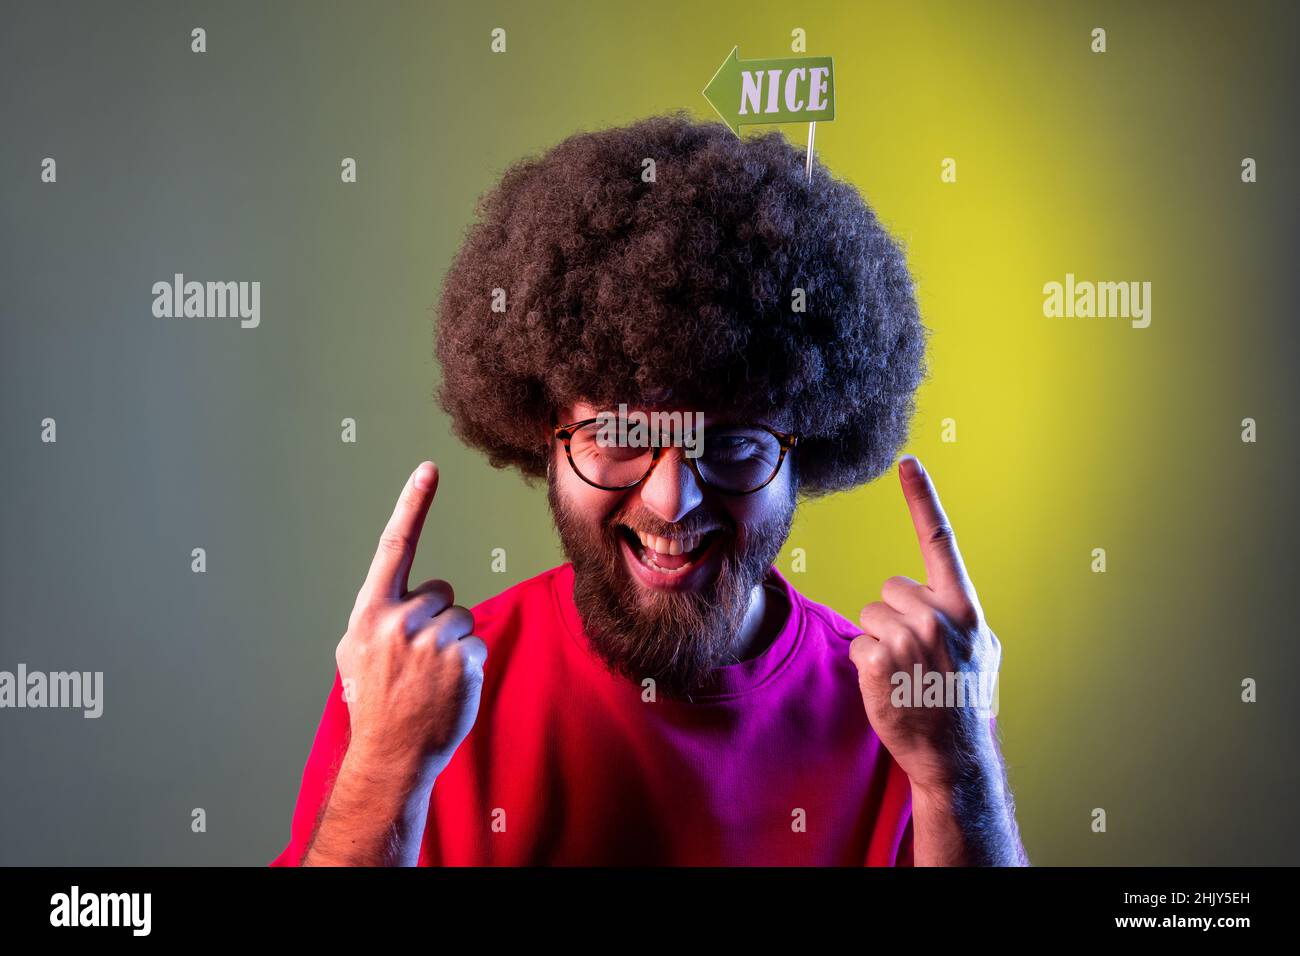 Portrait of positive funny hipster man with Afro hairstyle pointing at party props with nice inscription in his hair, wearing sweatshirt. Indoor studio shot isolated on colorful neon light background. Stock Photo